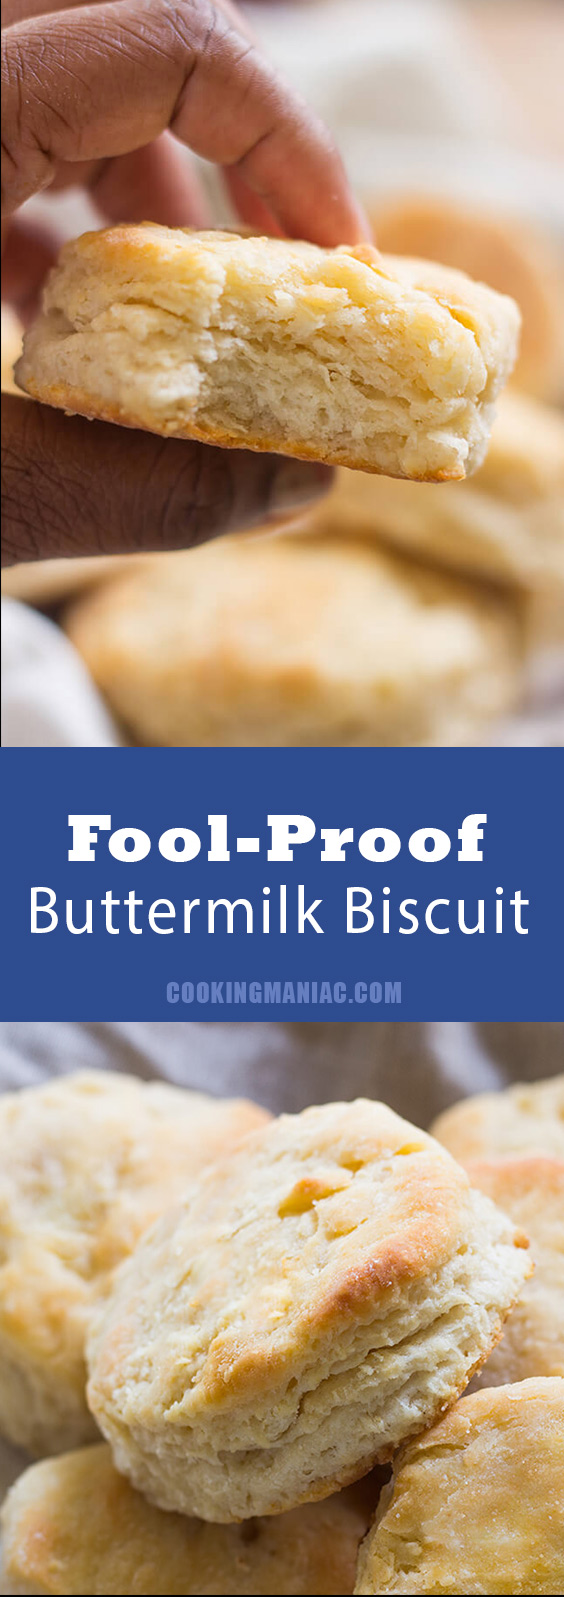 These easy fool proof fluffy biscuits are so easy to make and positively delicious.. This recipe is simple and always yields fluffy flaky biscuits.